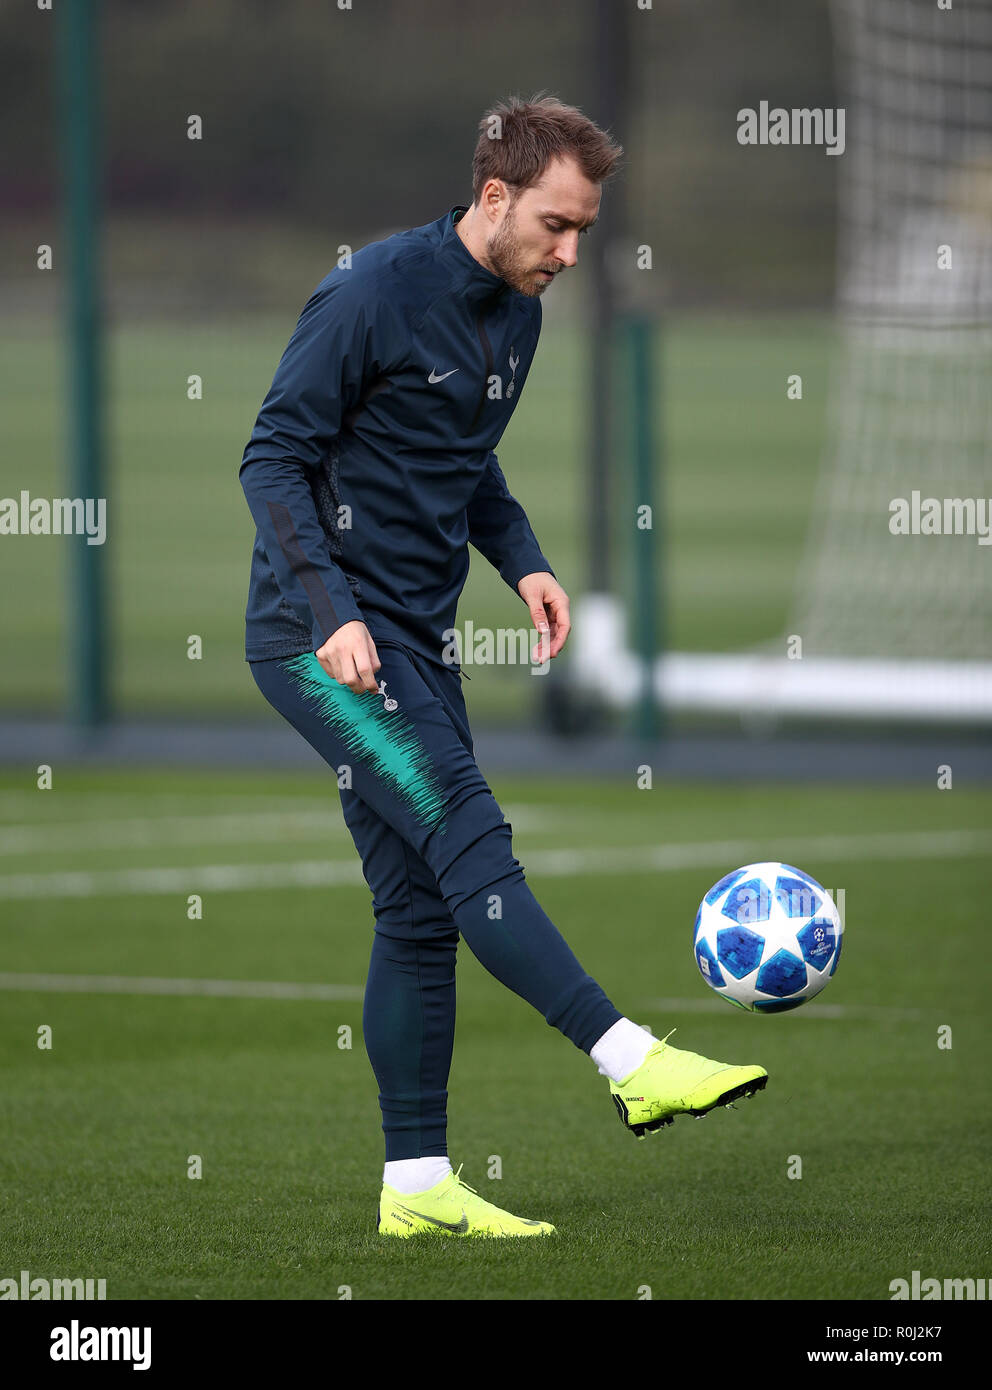 Tottenham Hotspur's Christian Eriksen during a training session at Enfield Training Ground, Stock Photo - Alamy